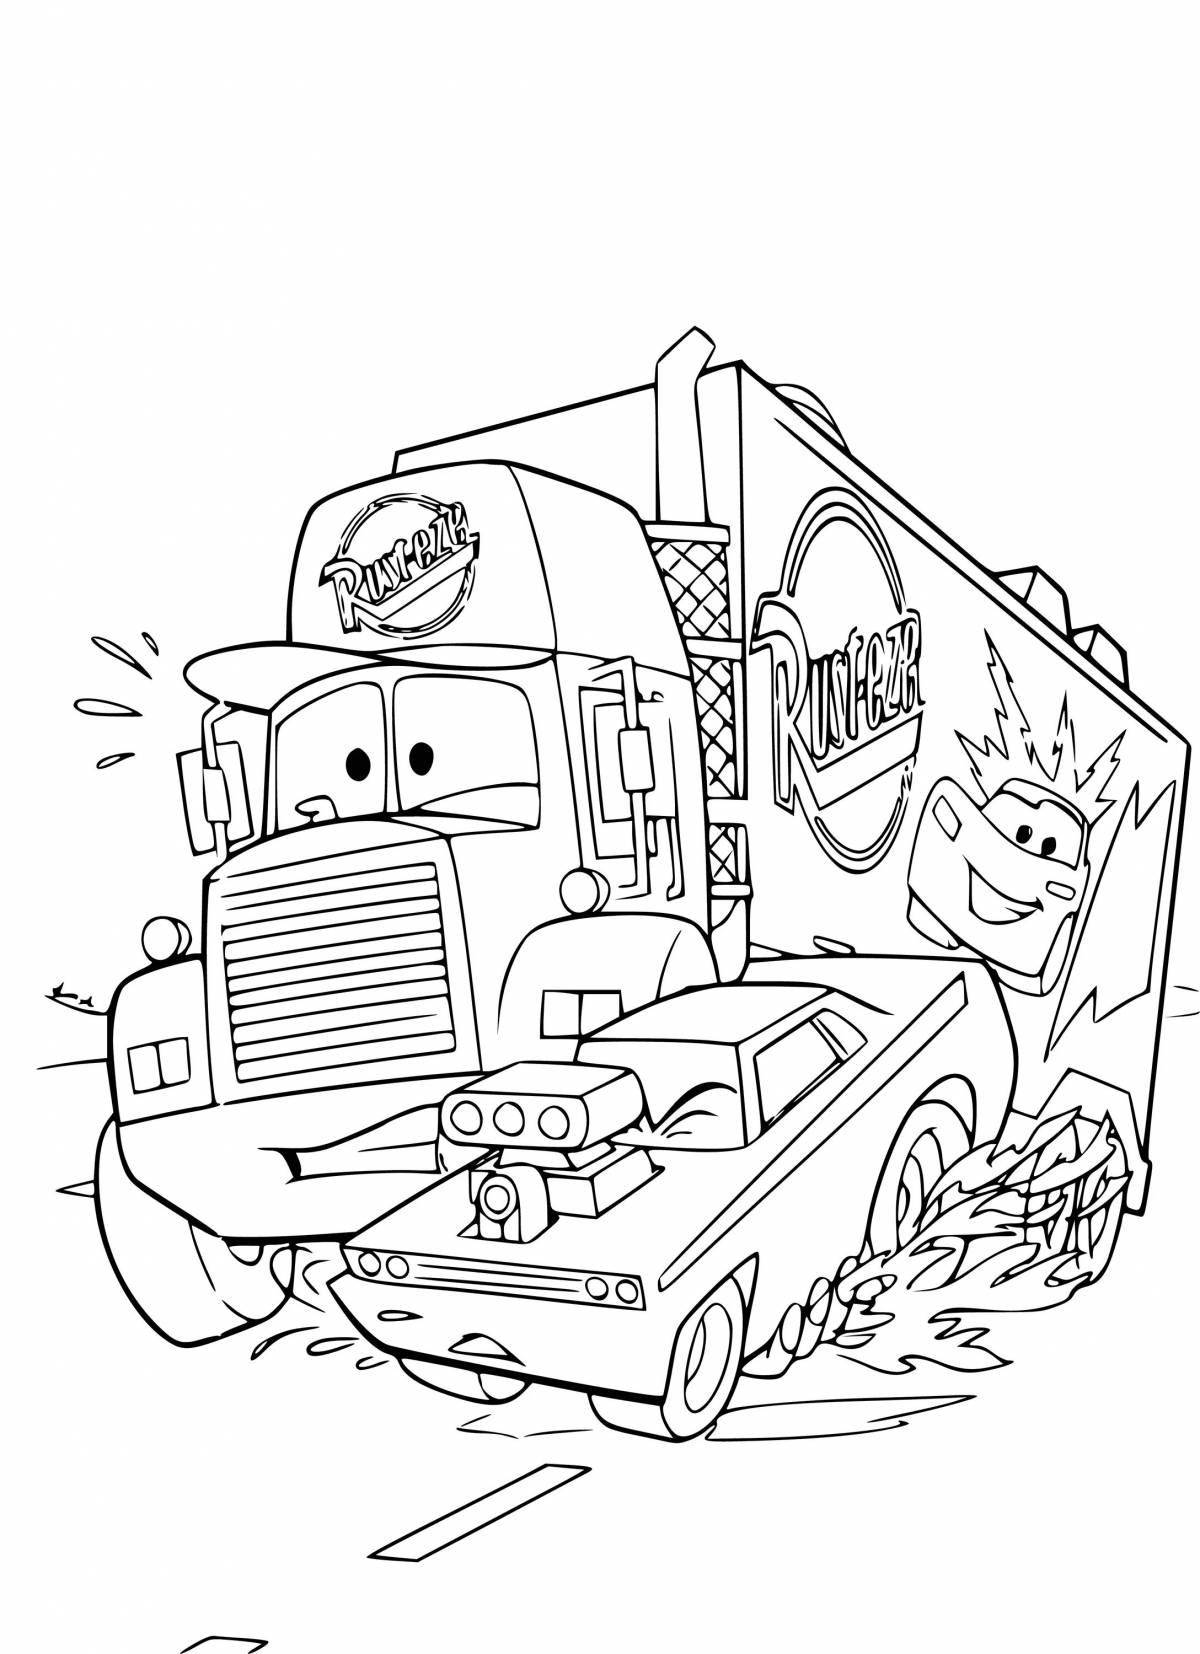 Frank's exciting car coloring page